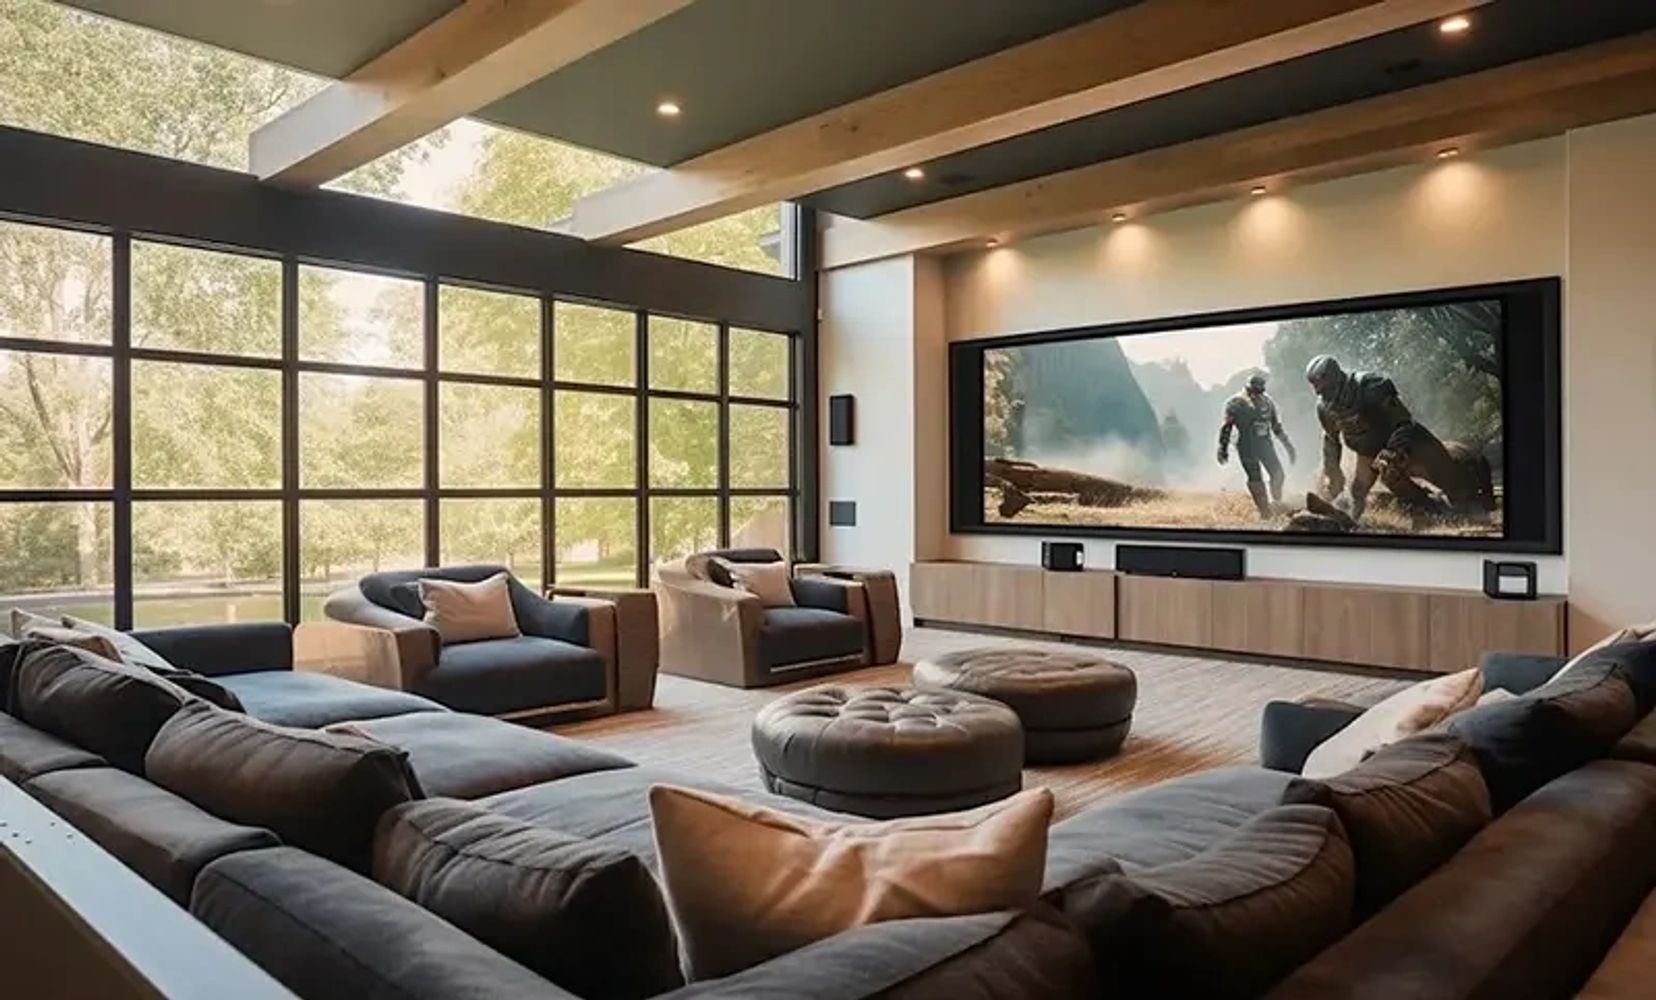 Home theater with 7.1 surround sound audio system in medford Oregon.